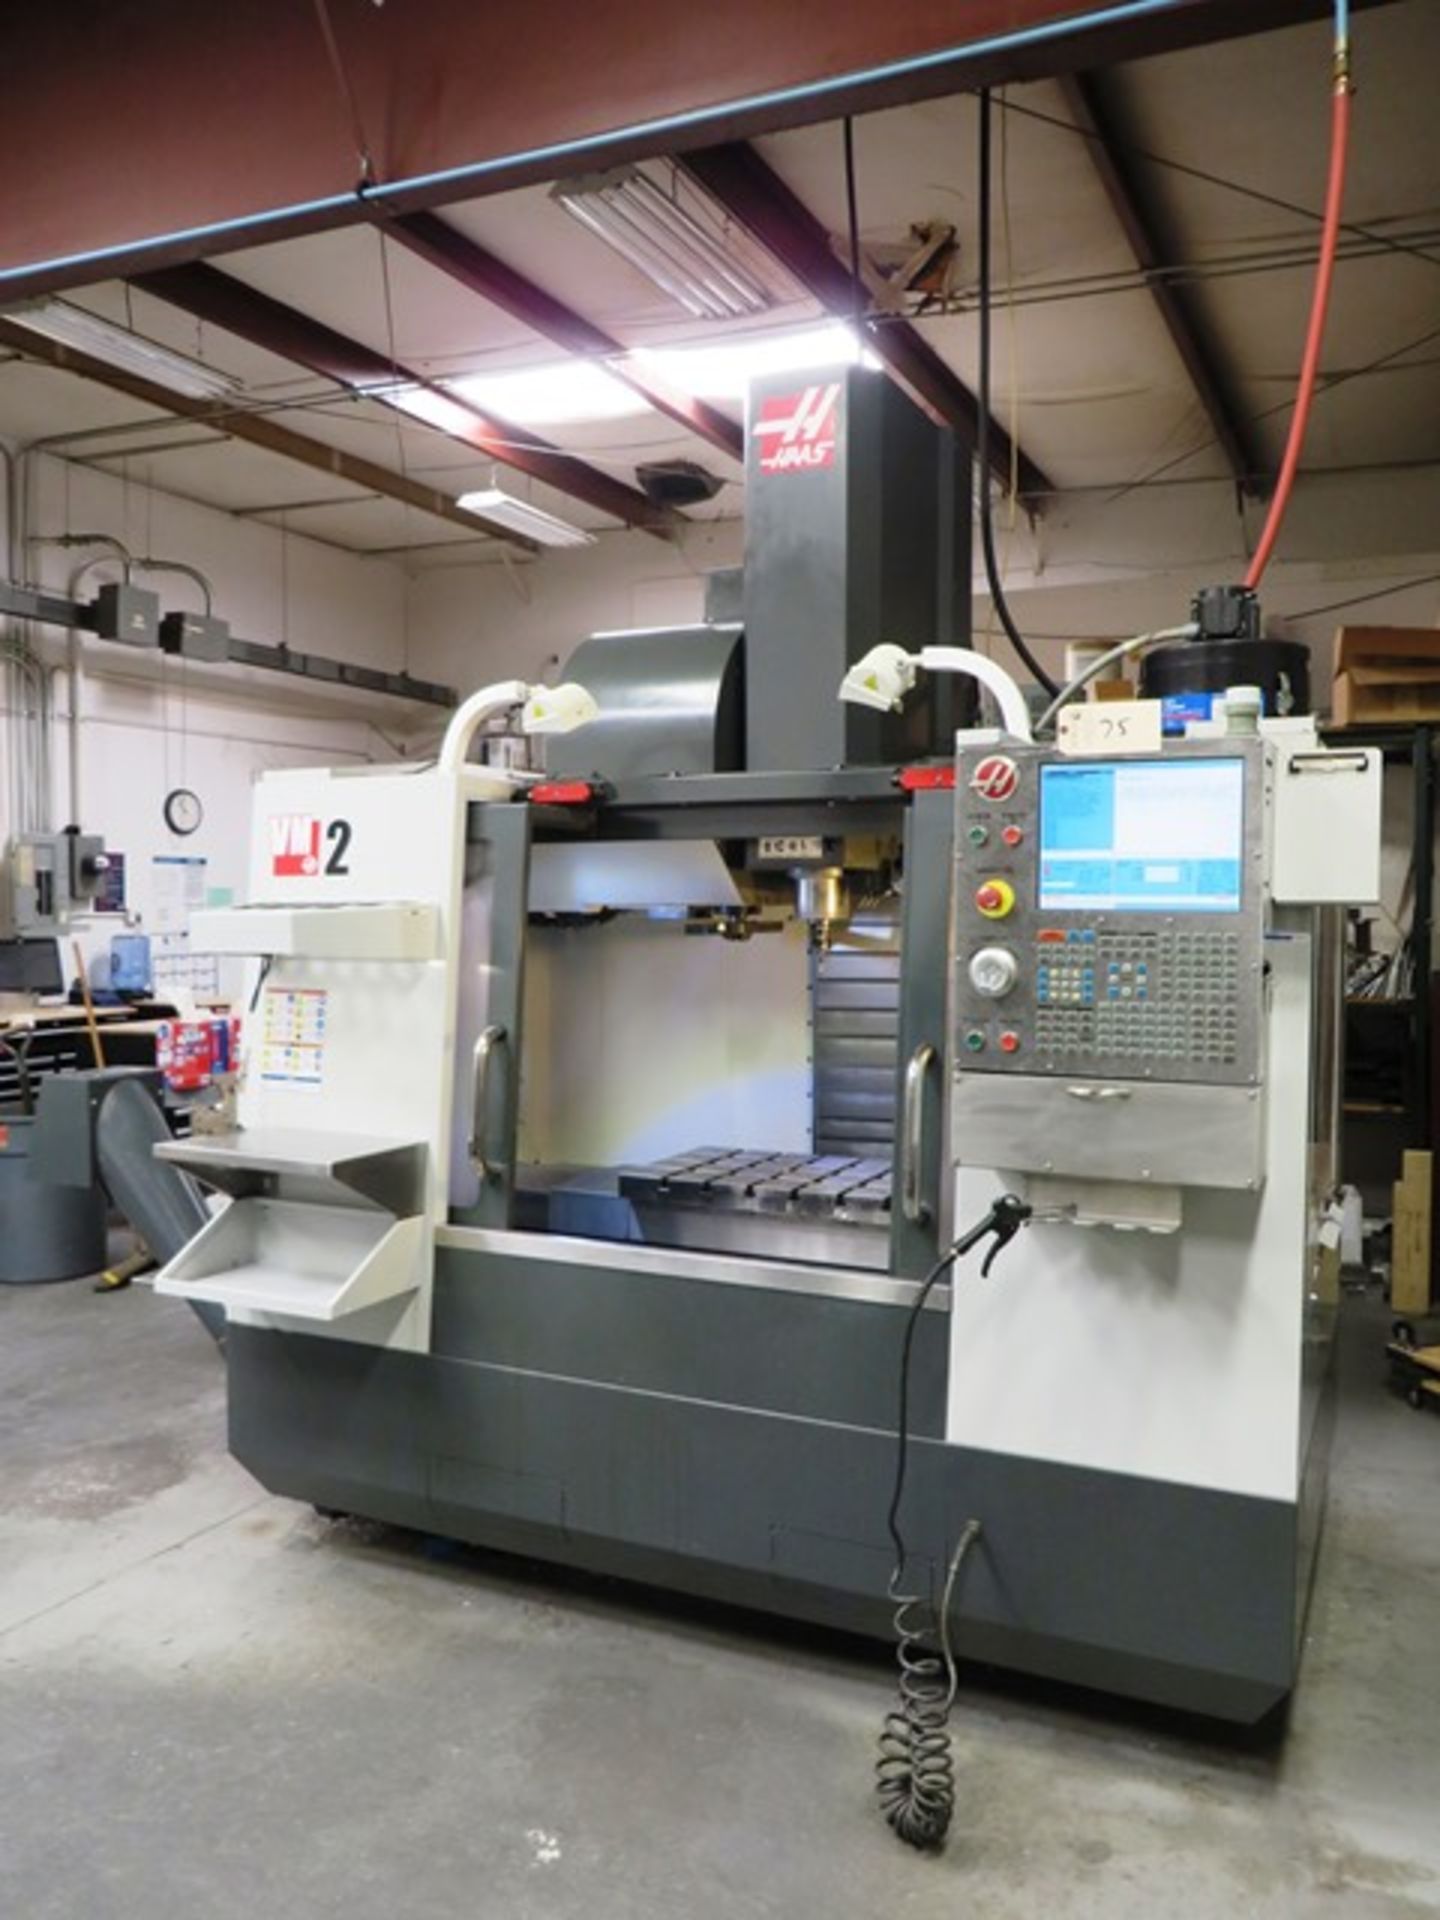 HAAS VM2 4-Axis CNC Vertical Machining Center - Image 5 of 7